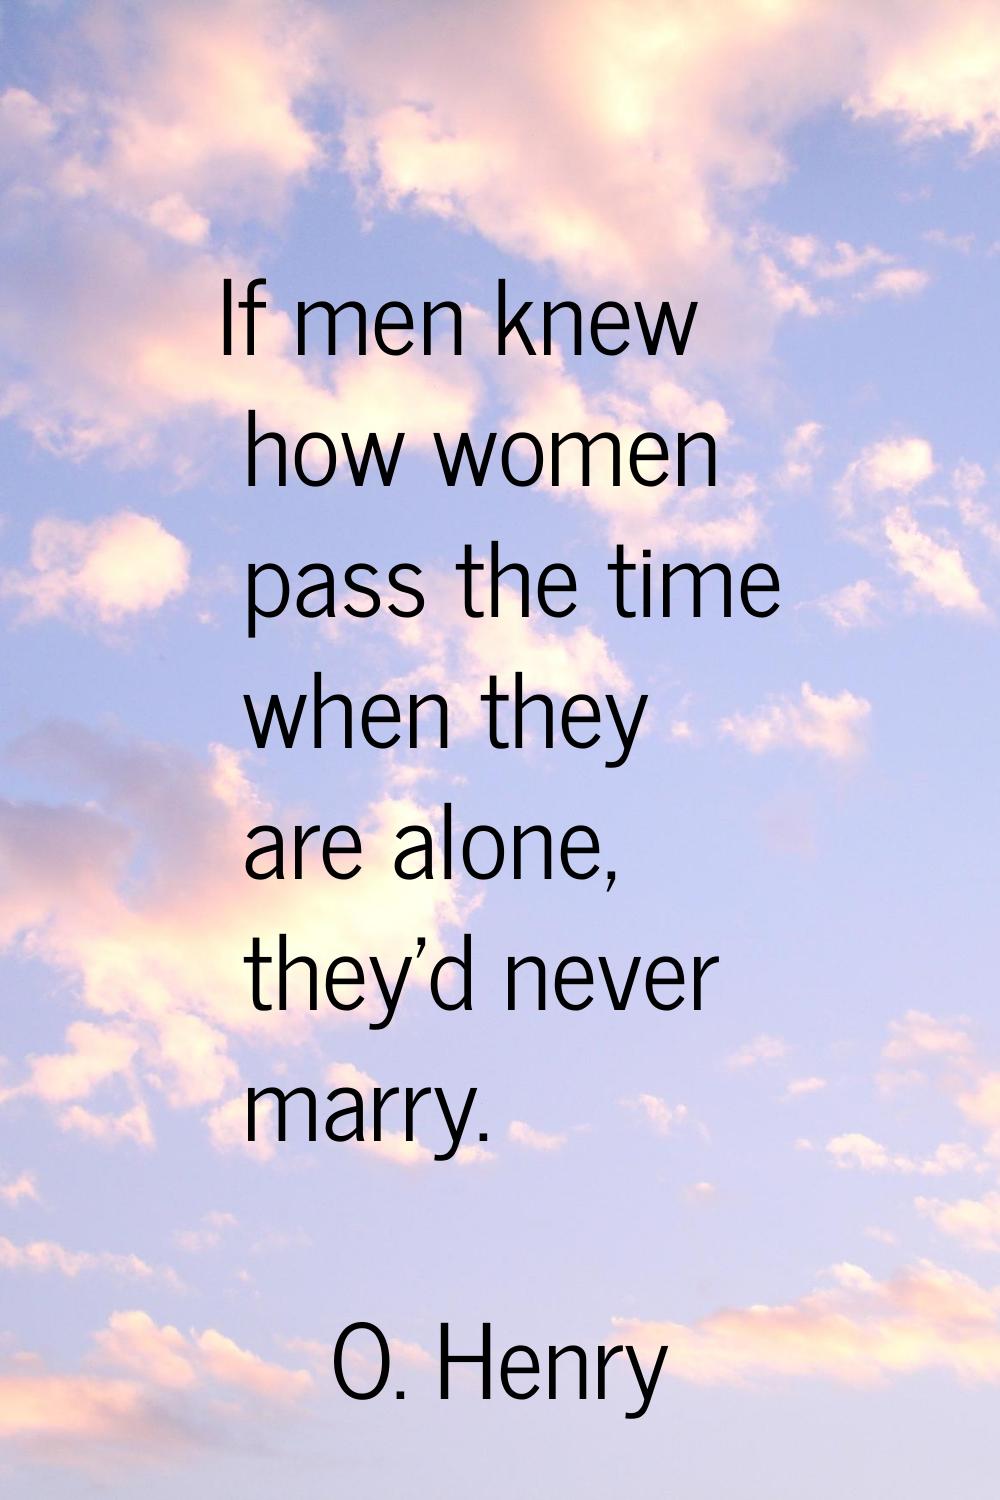 If men knew how women pass the time when they are alone, they'd never marry.